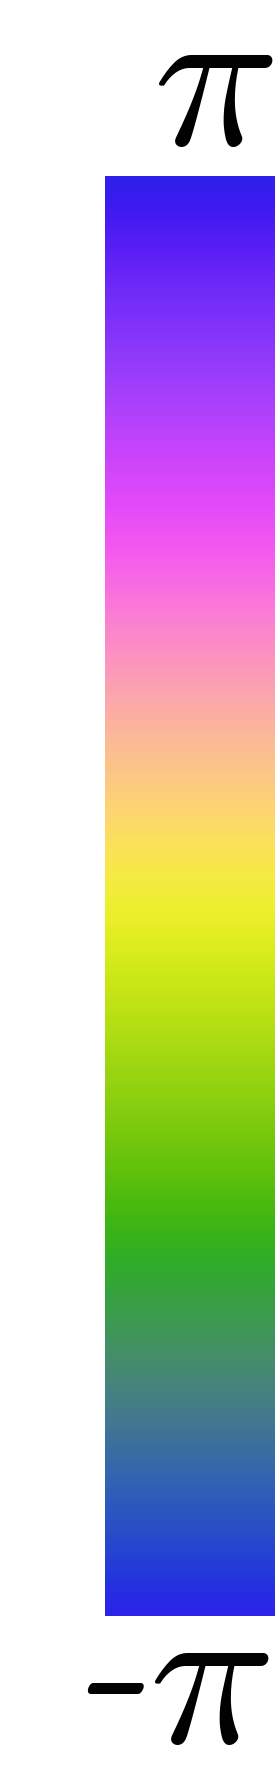 MYGBM_colorbar.png